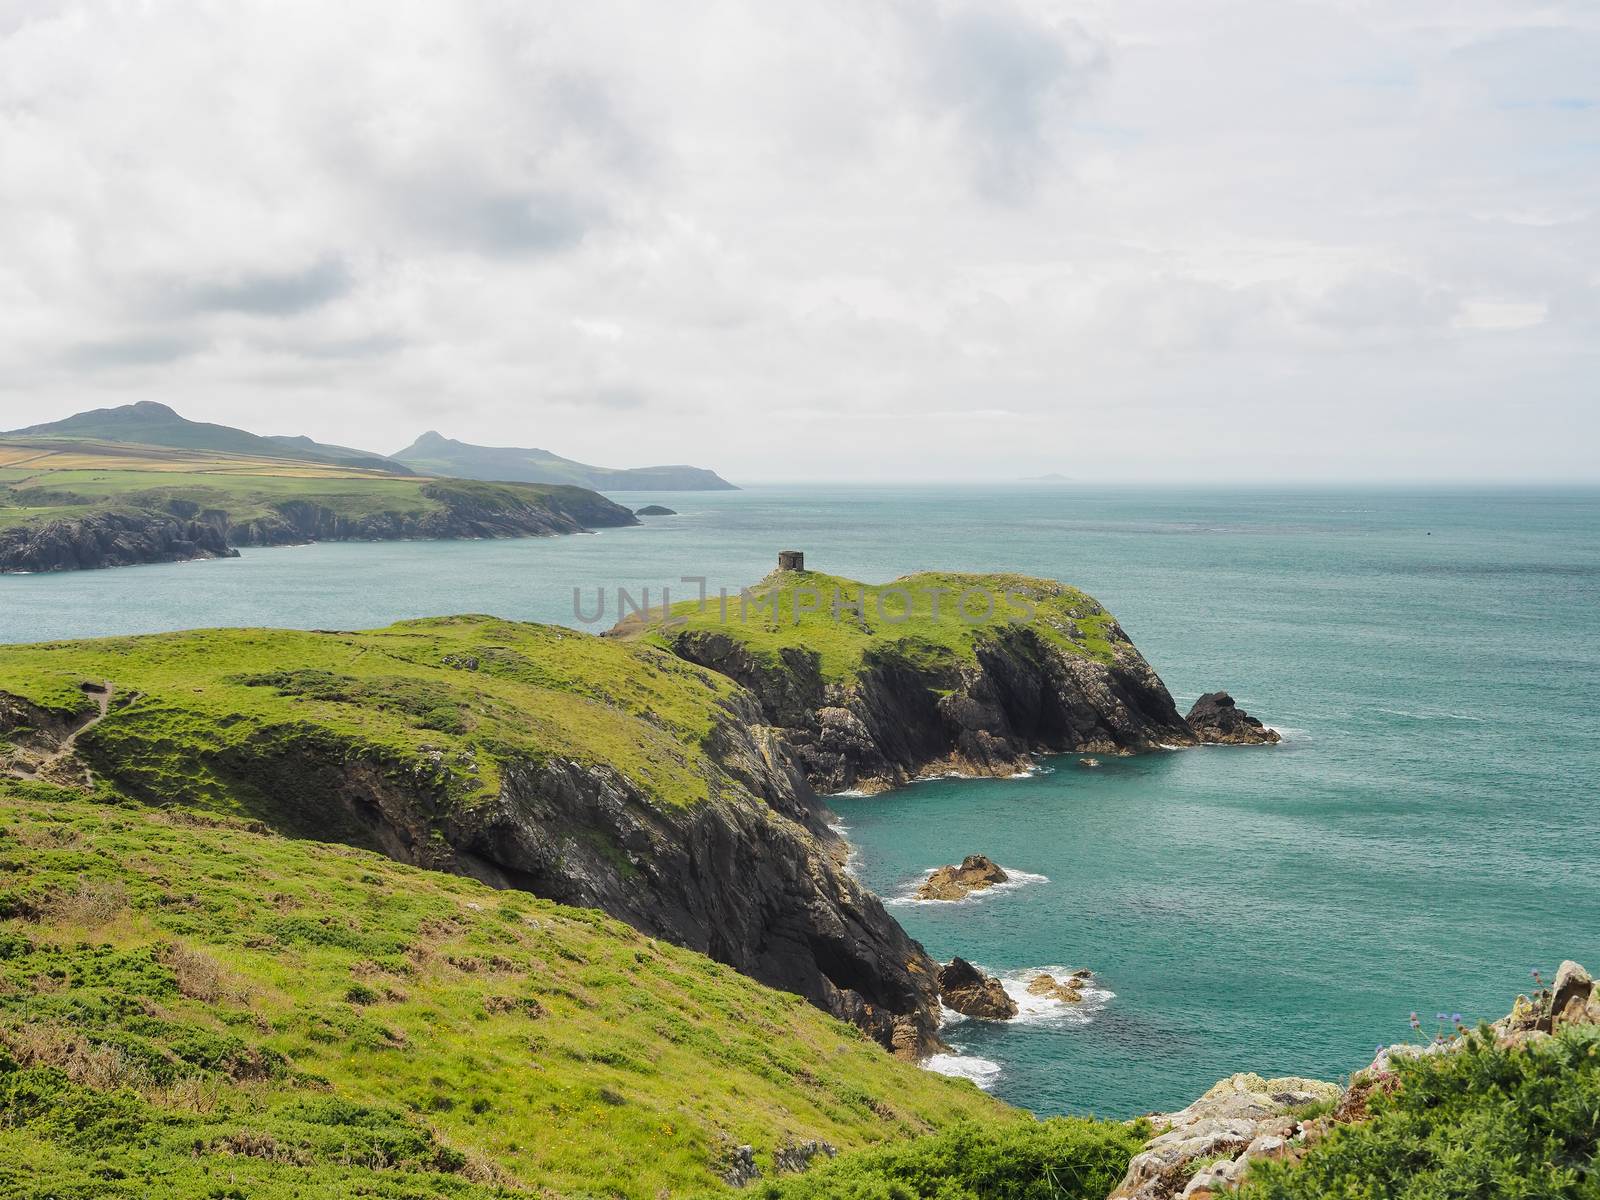 View from cliff top near Abereiddy of round stone tower, Pembrokeshire, Wales by PhilHarland